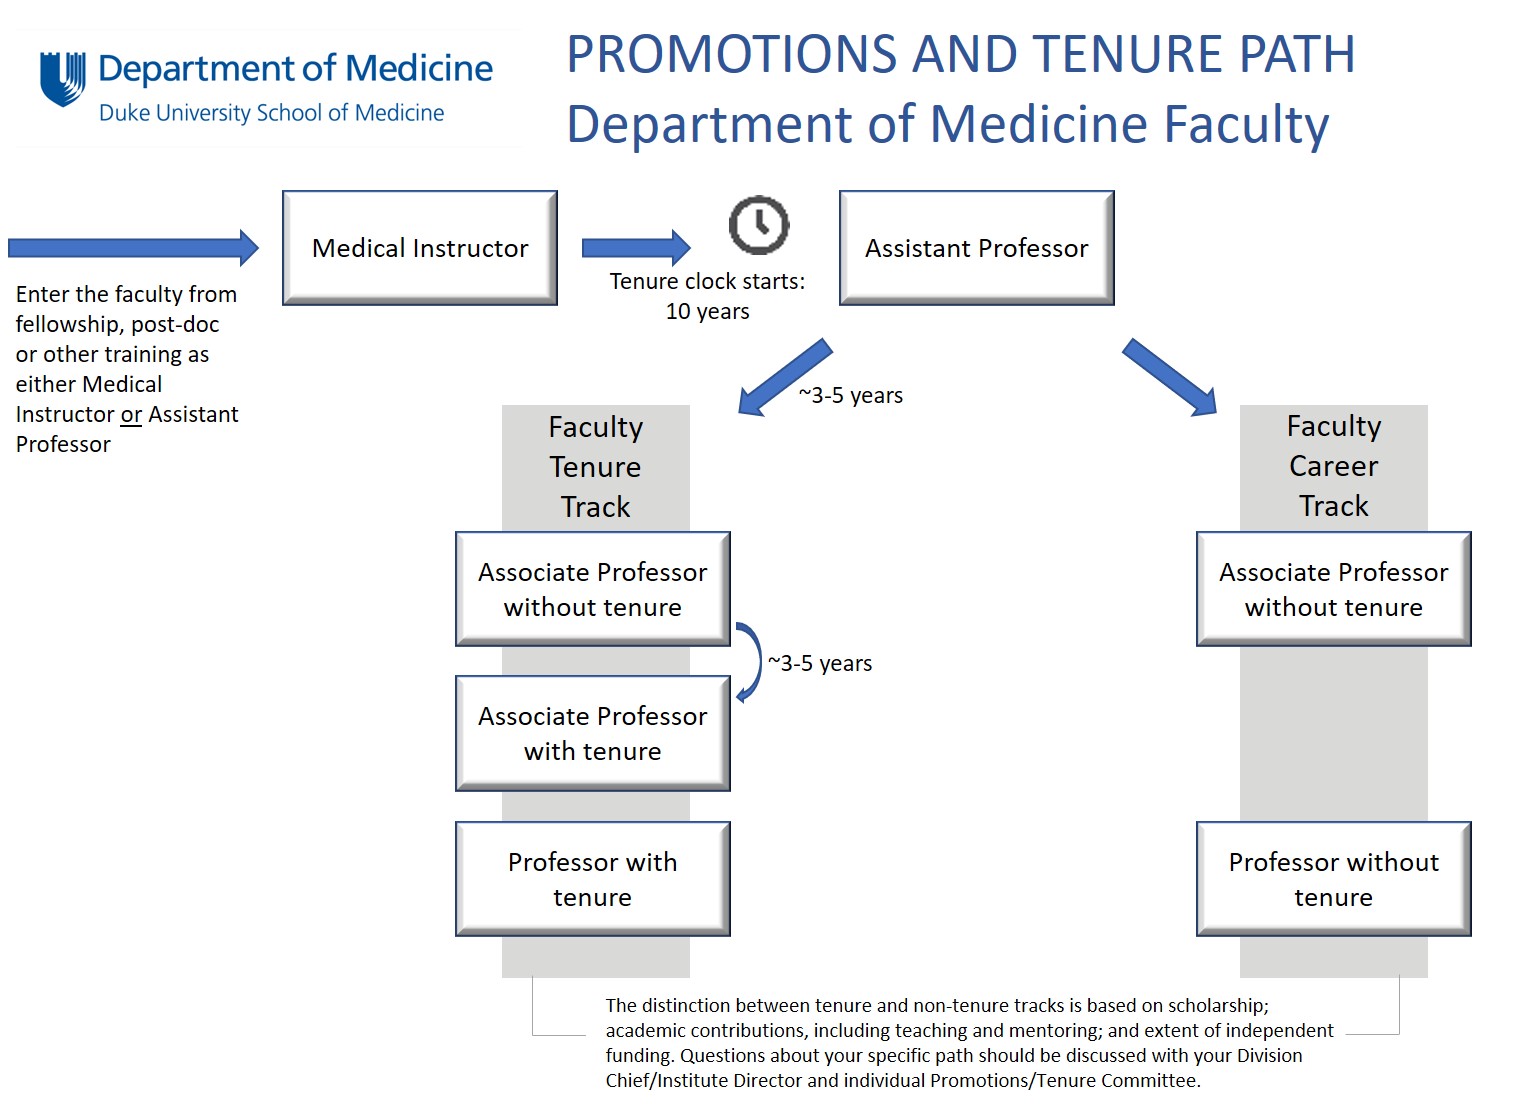 Promotions and Tenure Path